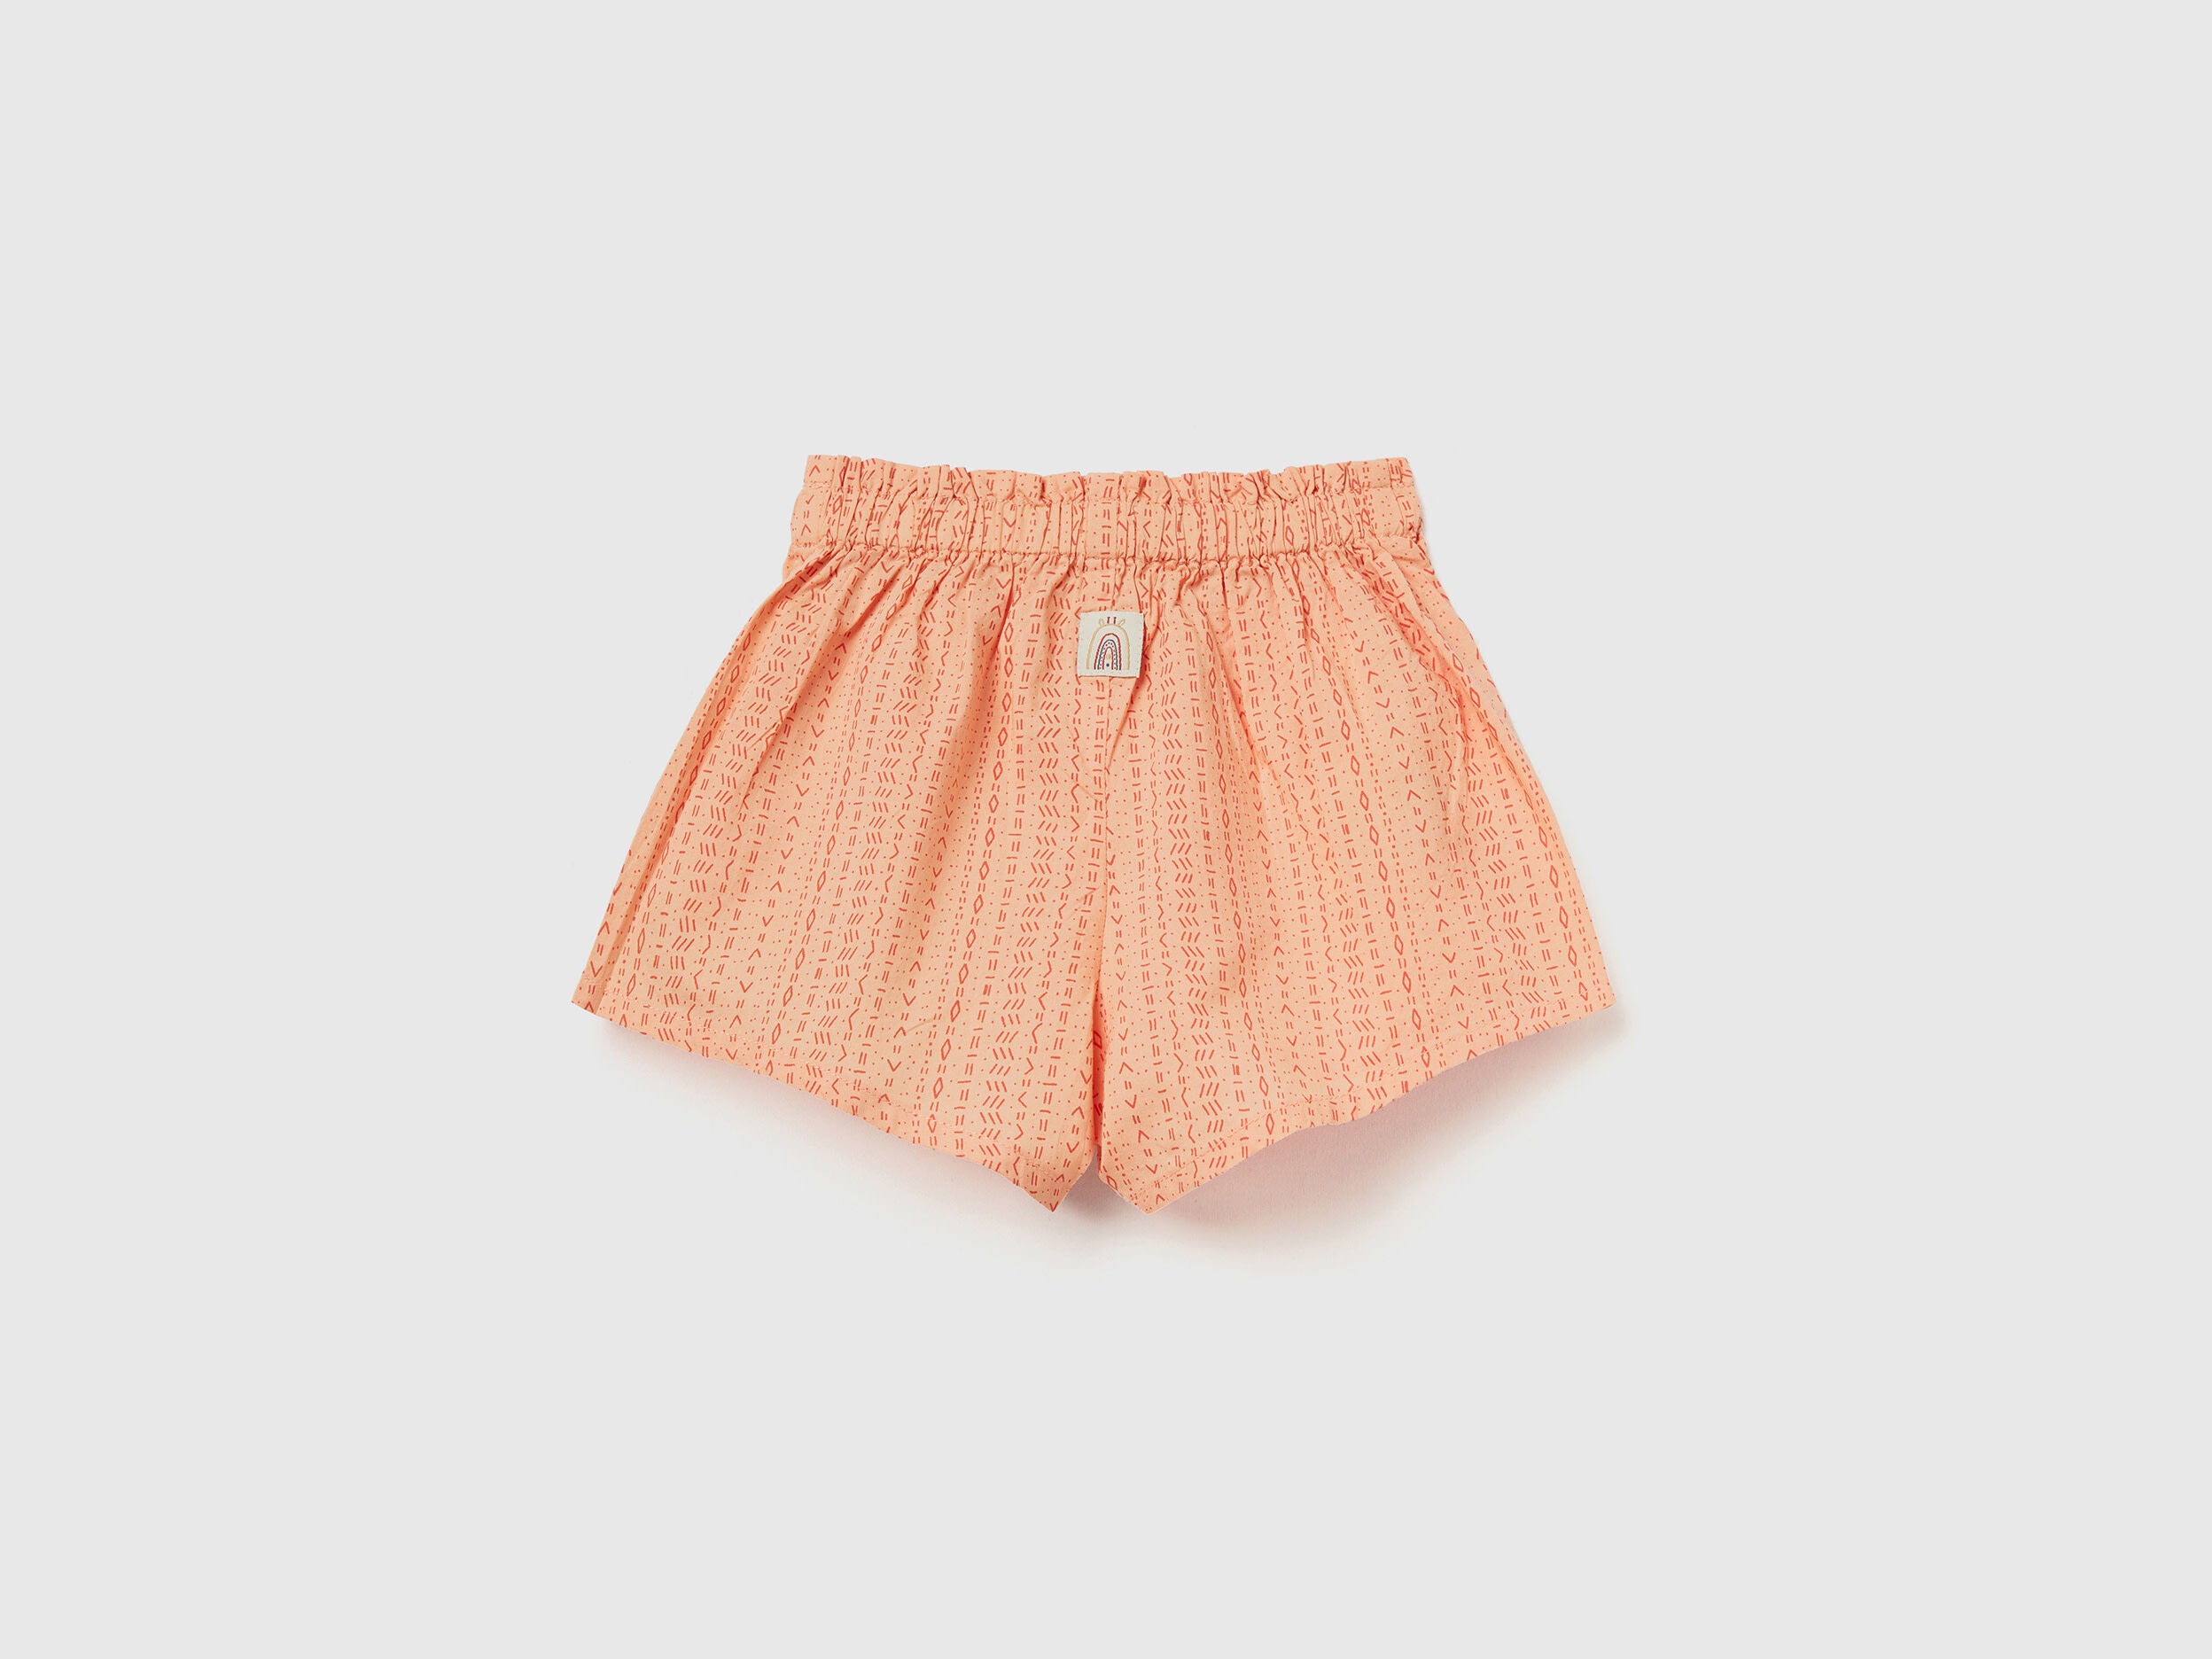 Micro Patterned Shorts